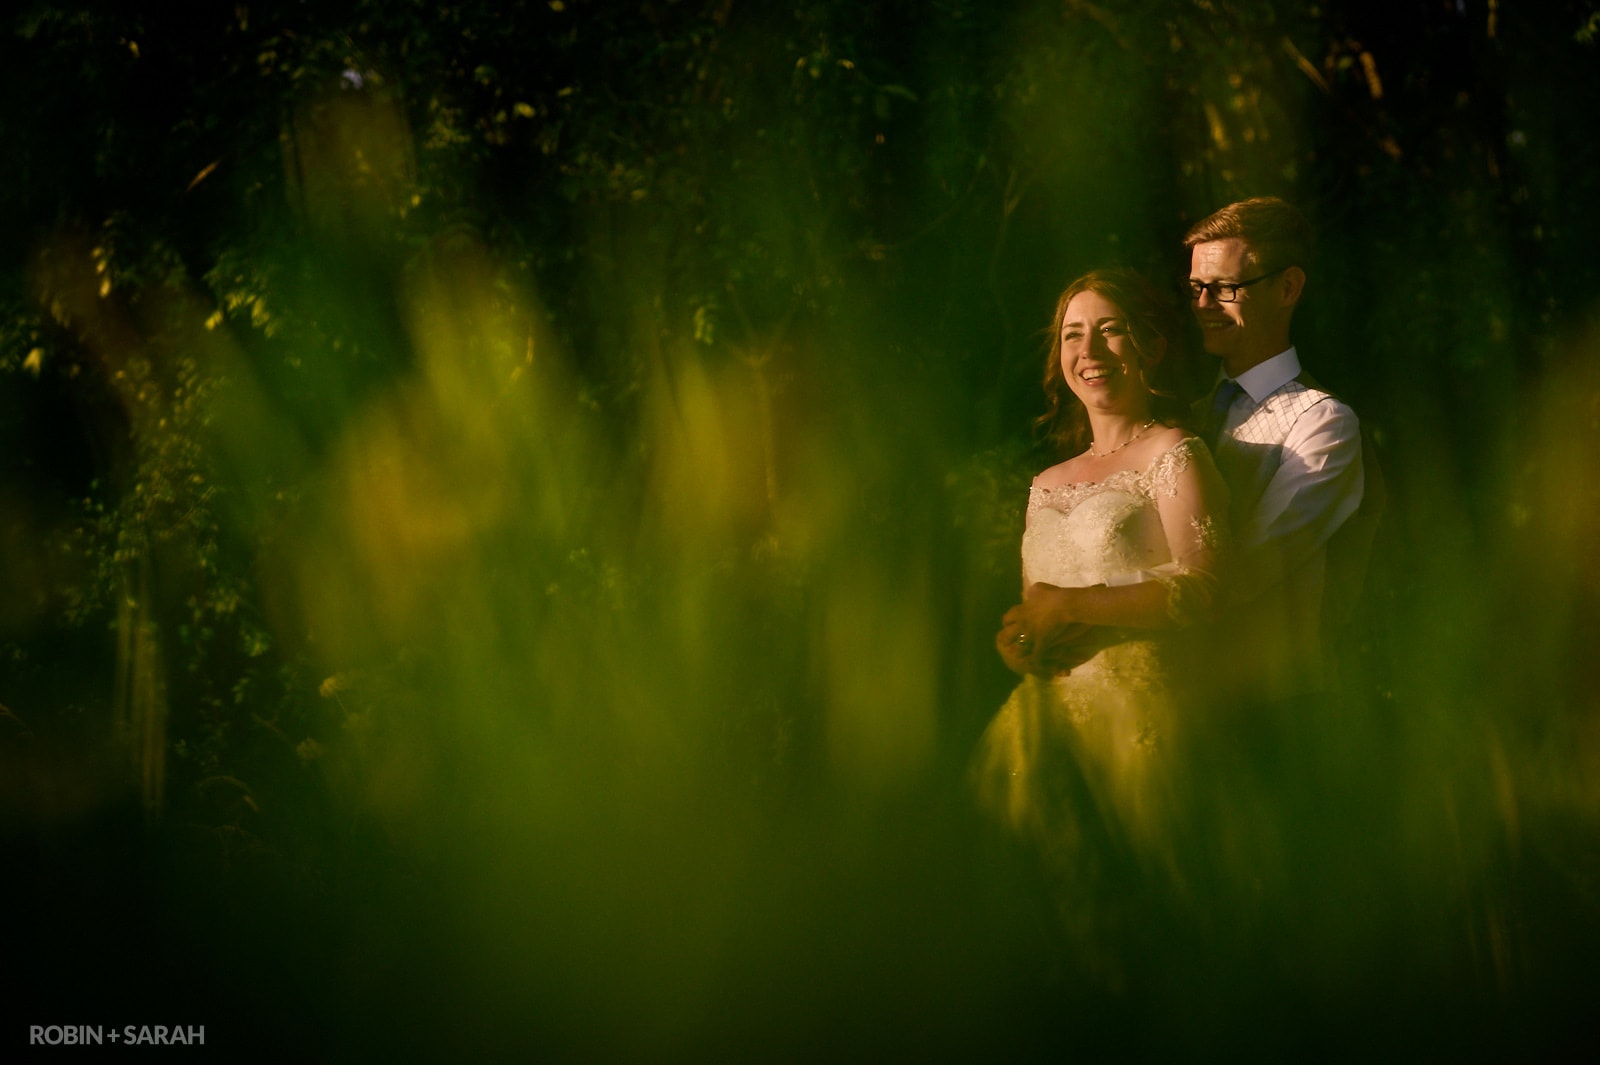 Bride and groom in field surrounded by long grass